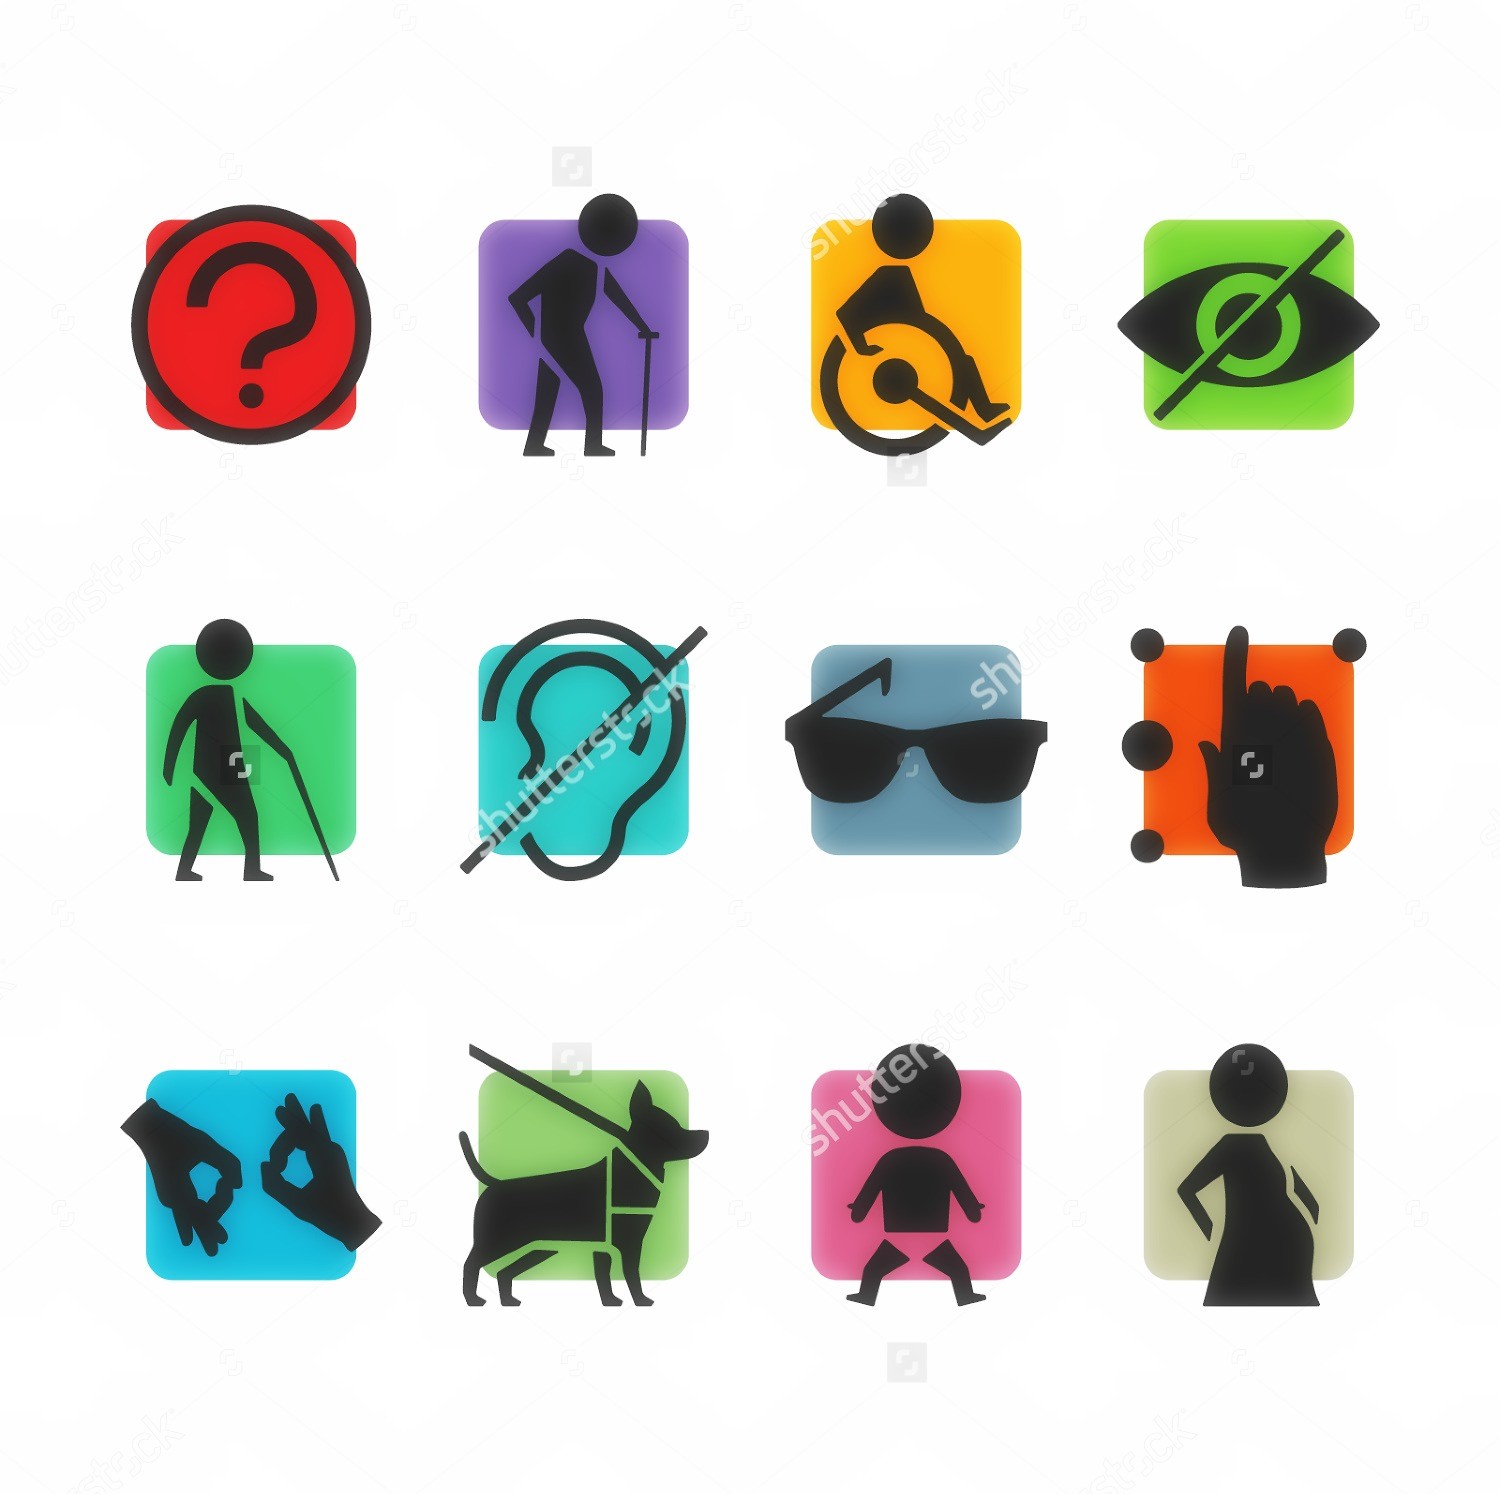 pictures showing a person with a cane, a person using a wheelchair, a hand using Braille, hands signing, a service animal, a baby, a pregnant person, glasses, an ear and an eye.